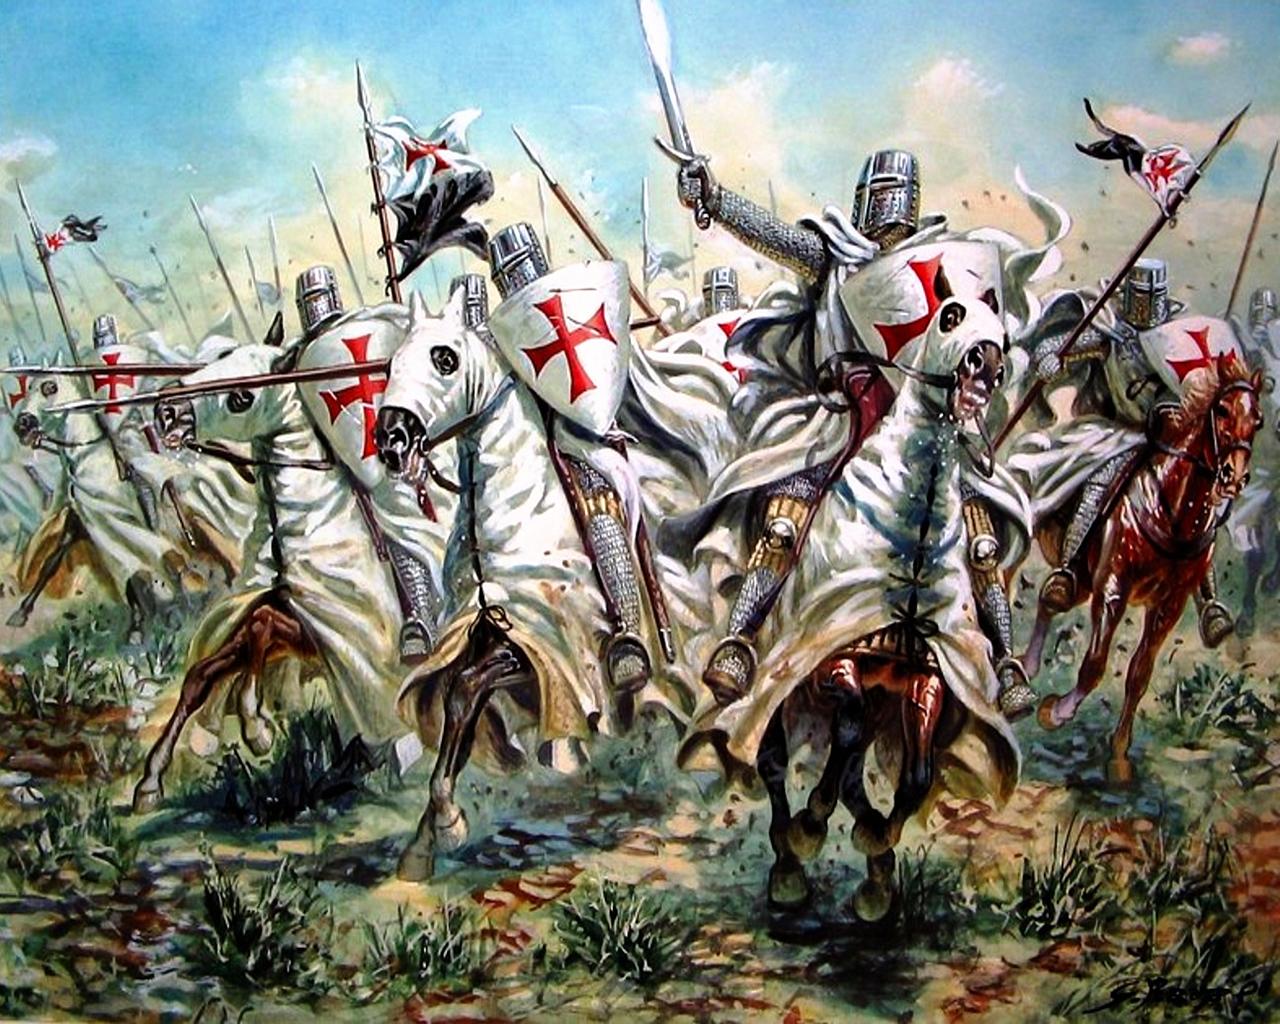 Image result for crusaders